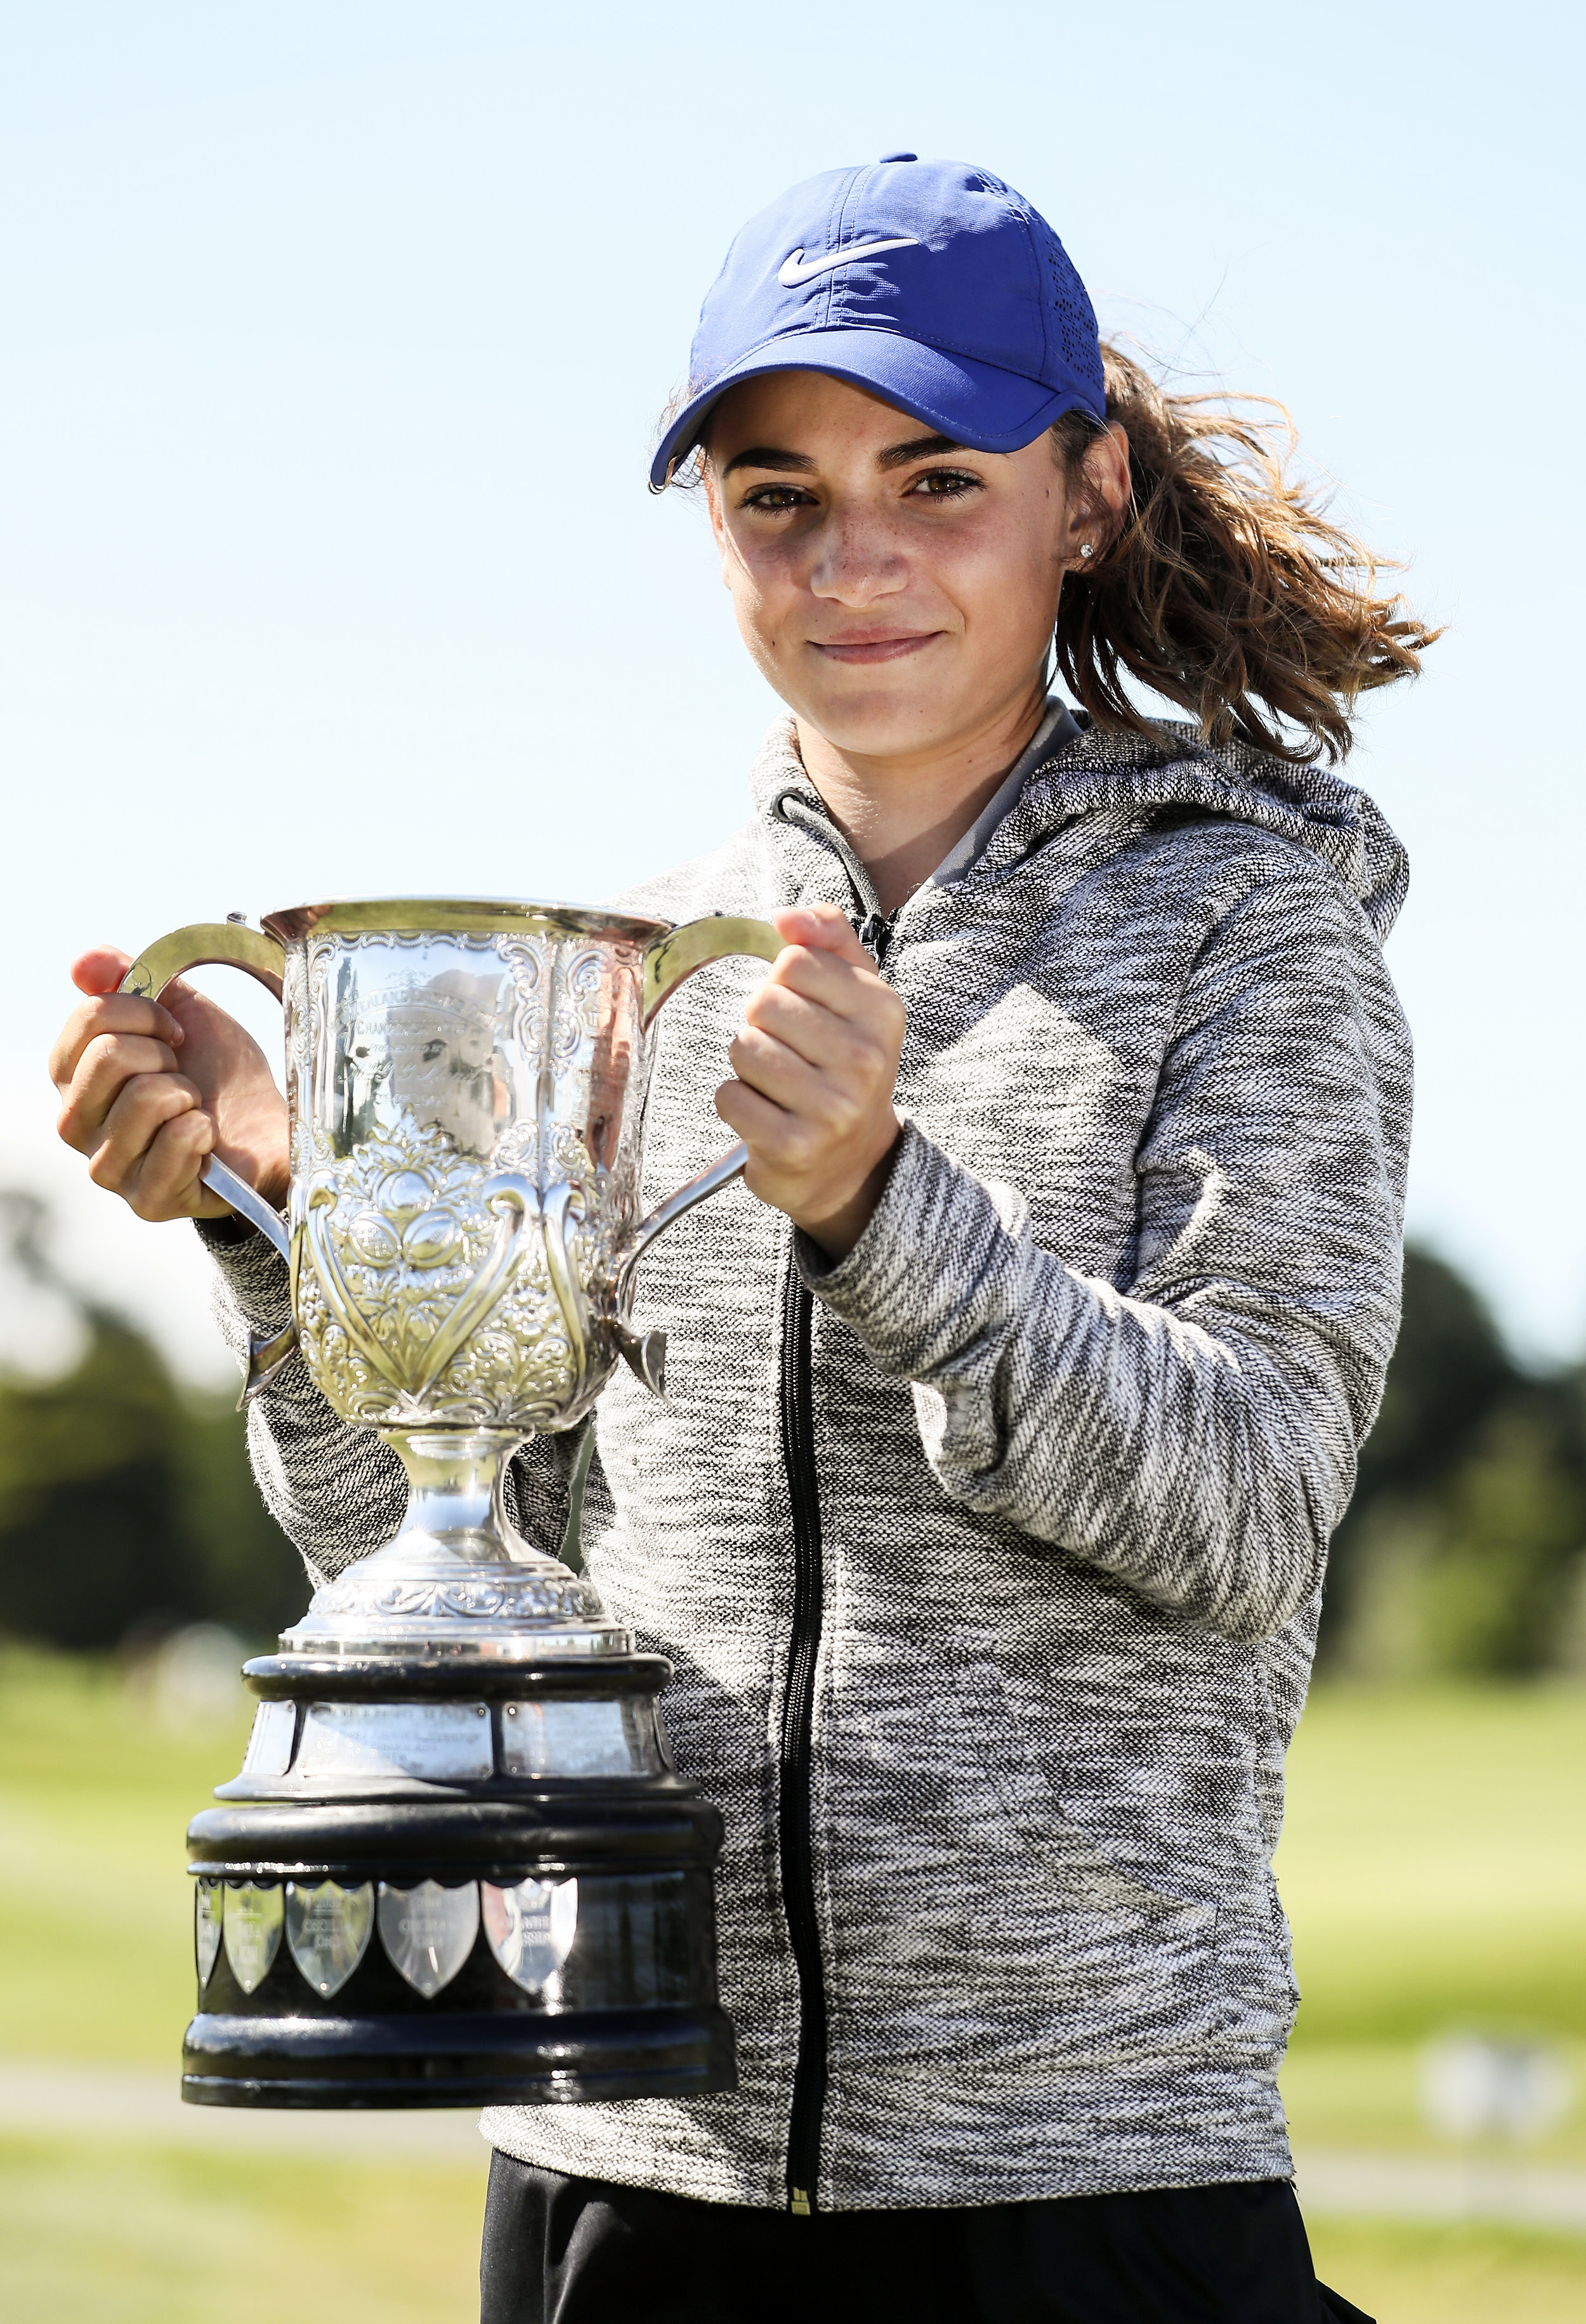 — in Pacific Brunotti Silvia Zealand New adds Amateur 14-year-olds Golfer record to NZ of